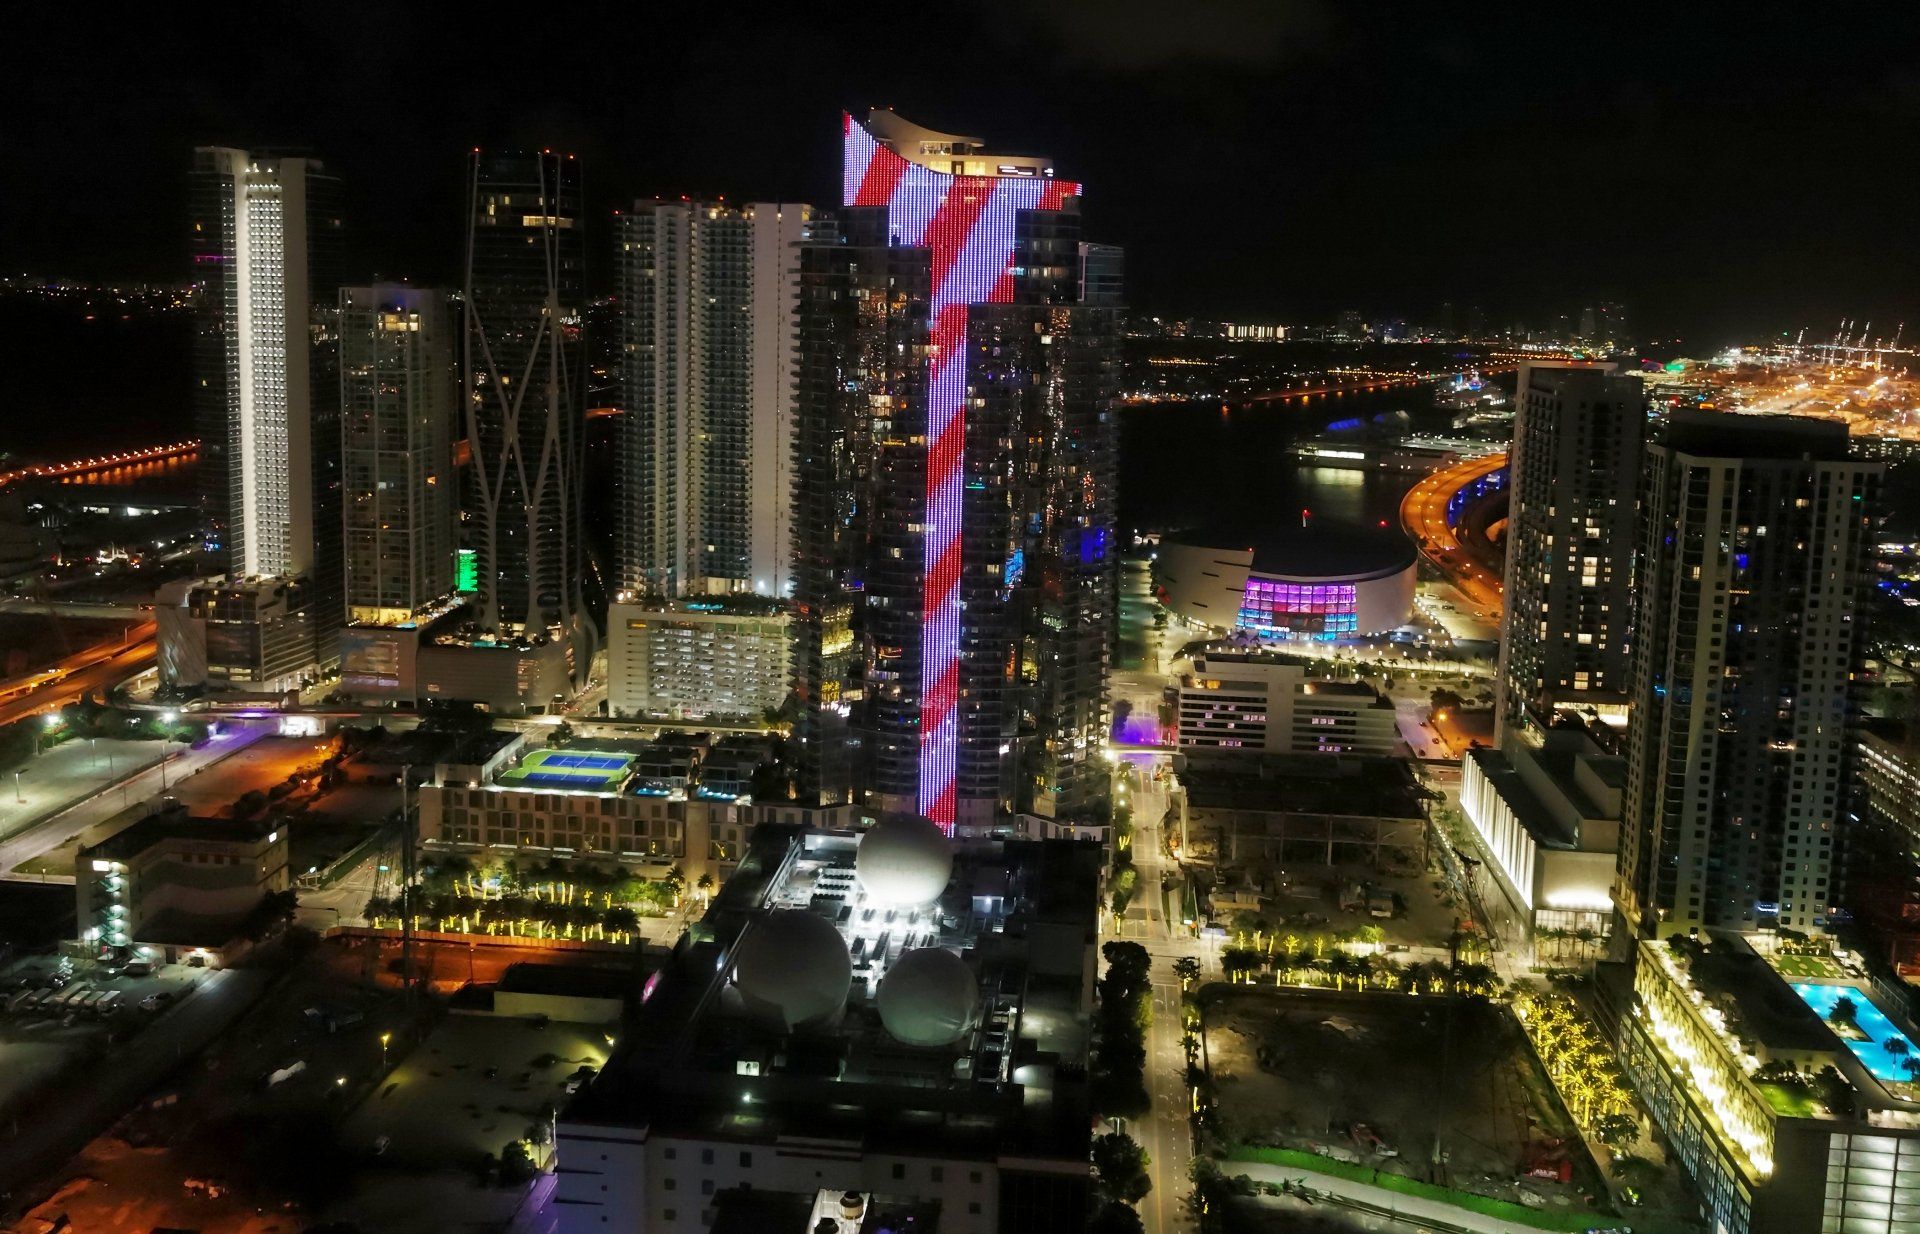 World’s Tallest Digital “Merry Christmas” Candy Cane: world record in Miami, Florida